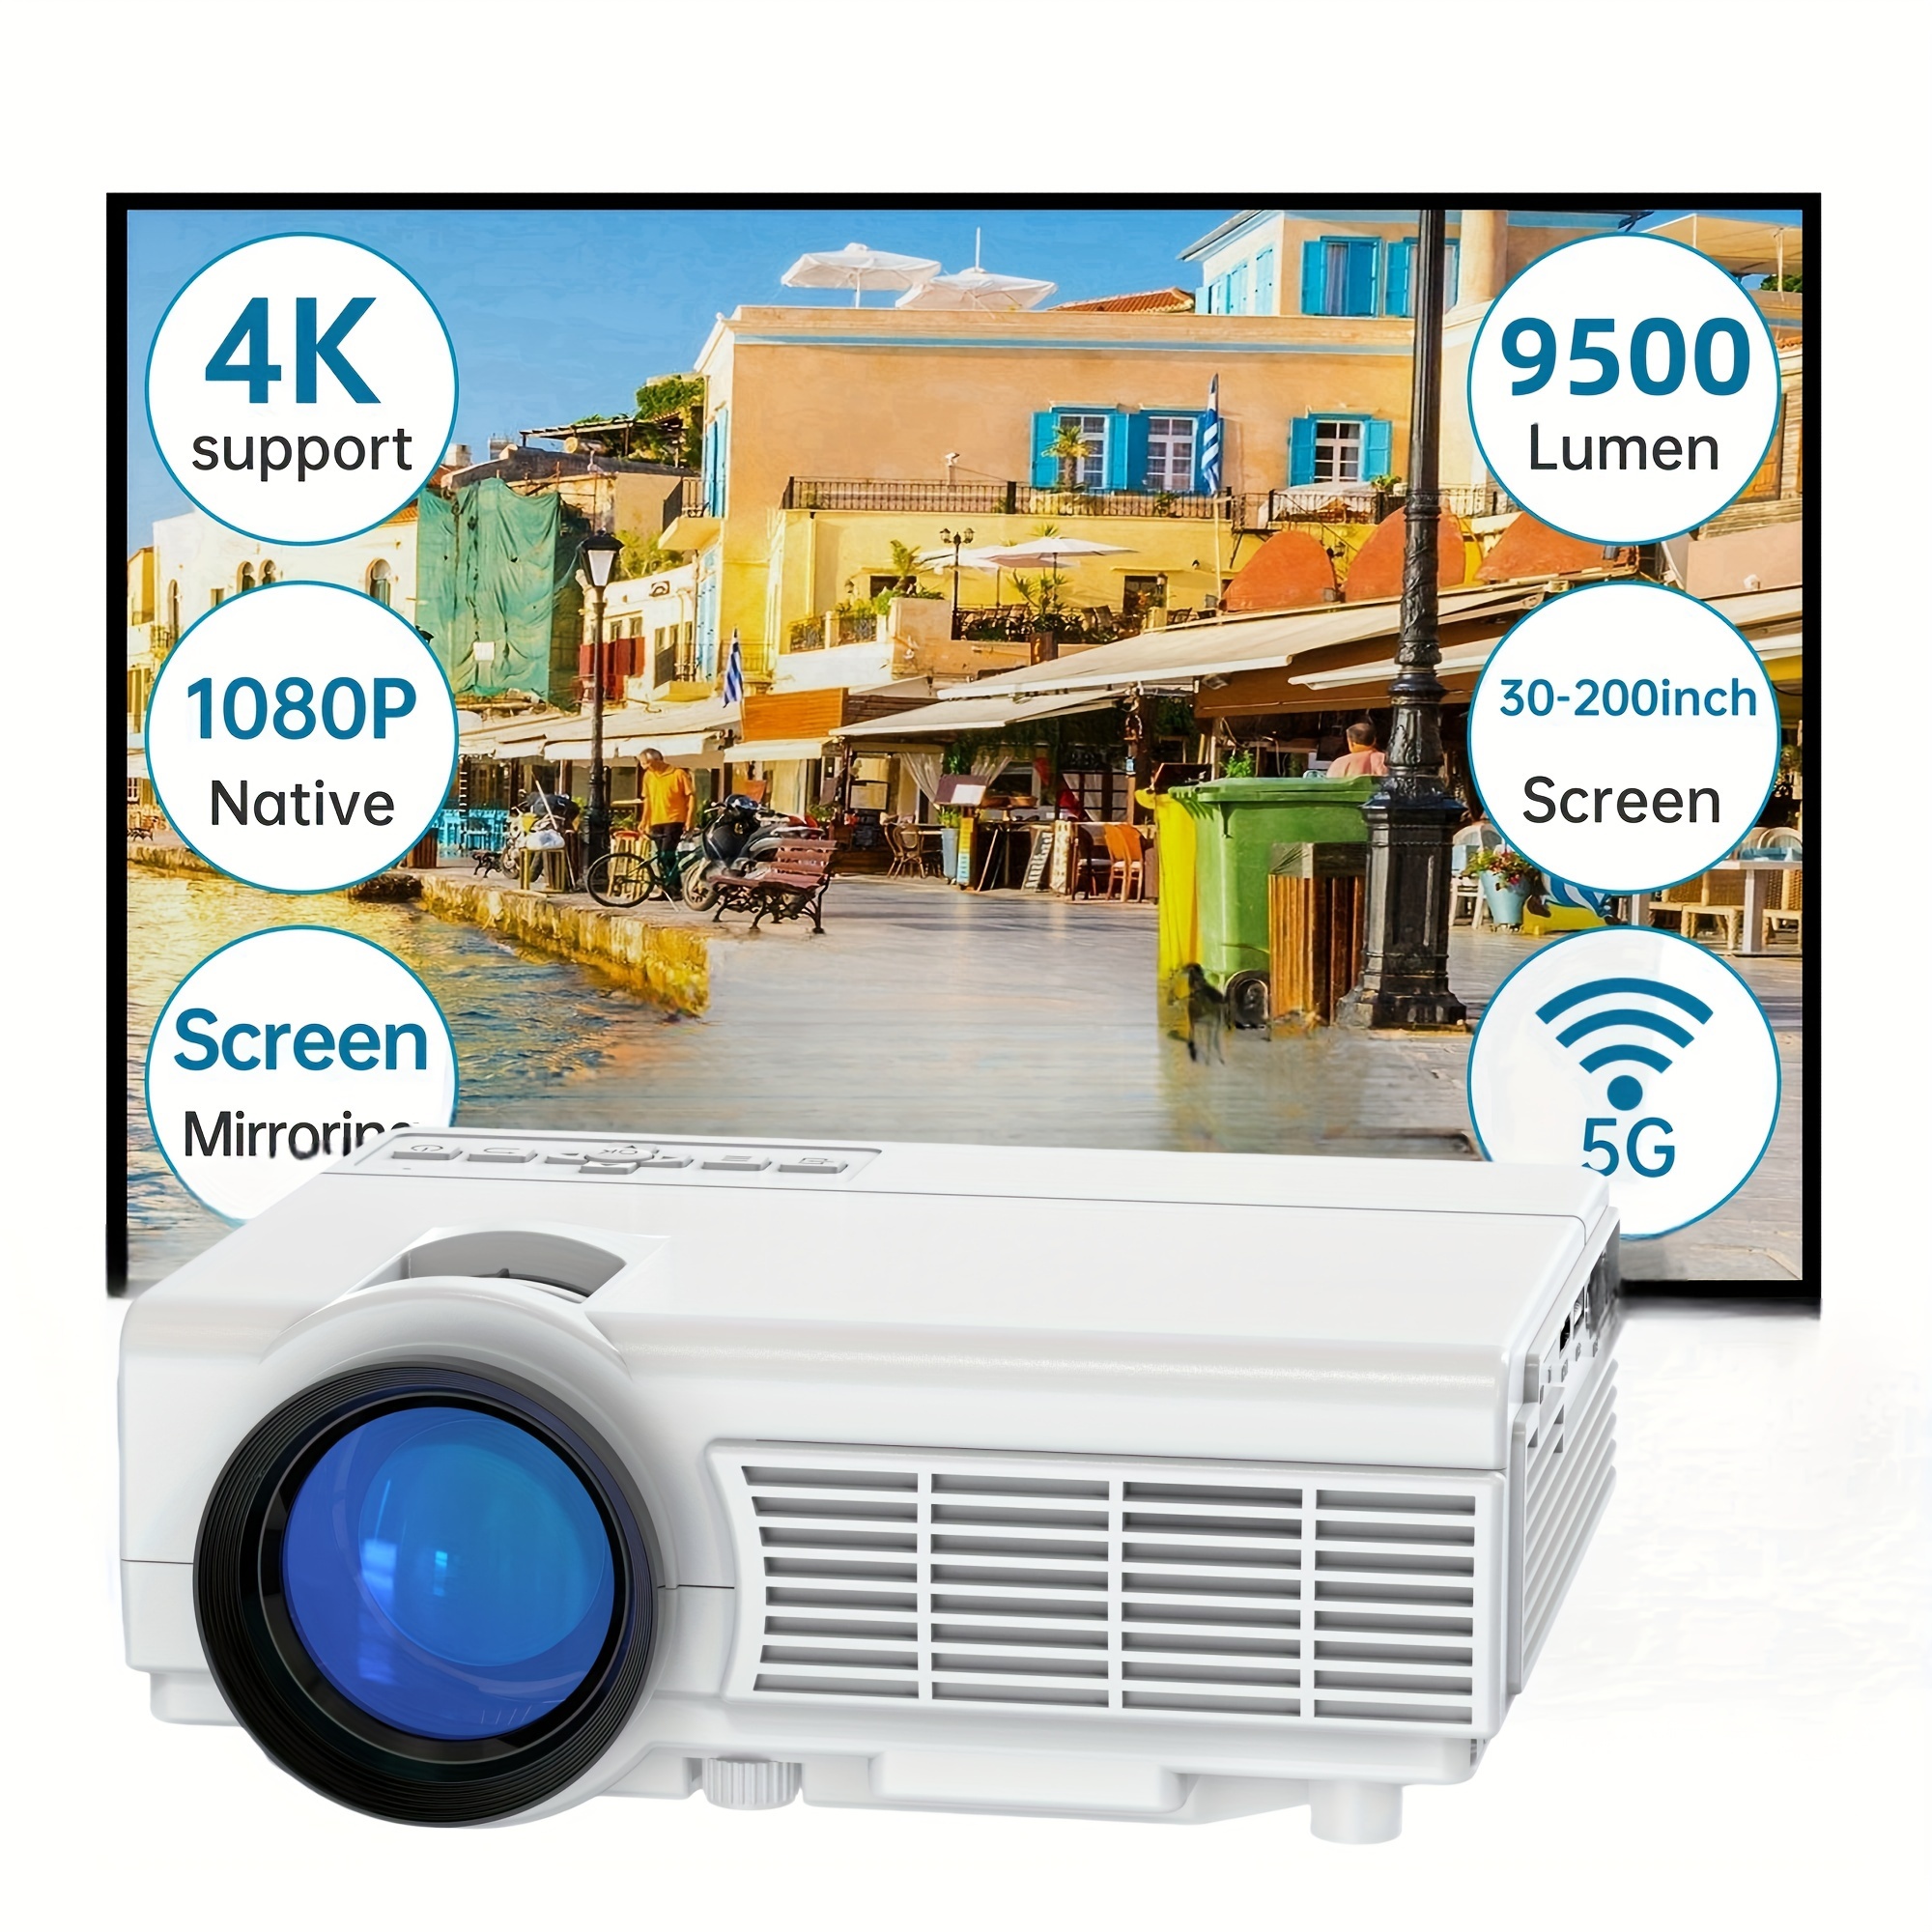 

Native 1080p Projector With 5g Wifi, 9000 Lumen Mini Portable Projector 4k Supported, Home&outdoor Movie Projector Compatible With Tv Stick Smartphone & Tablet Laptop Usb Tf.